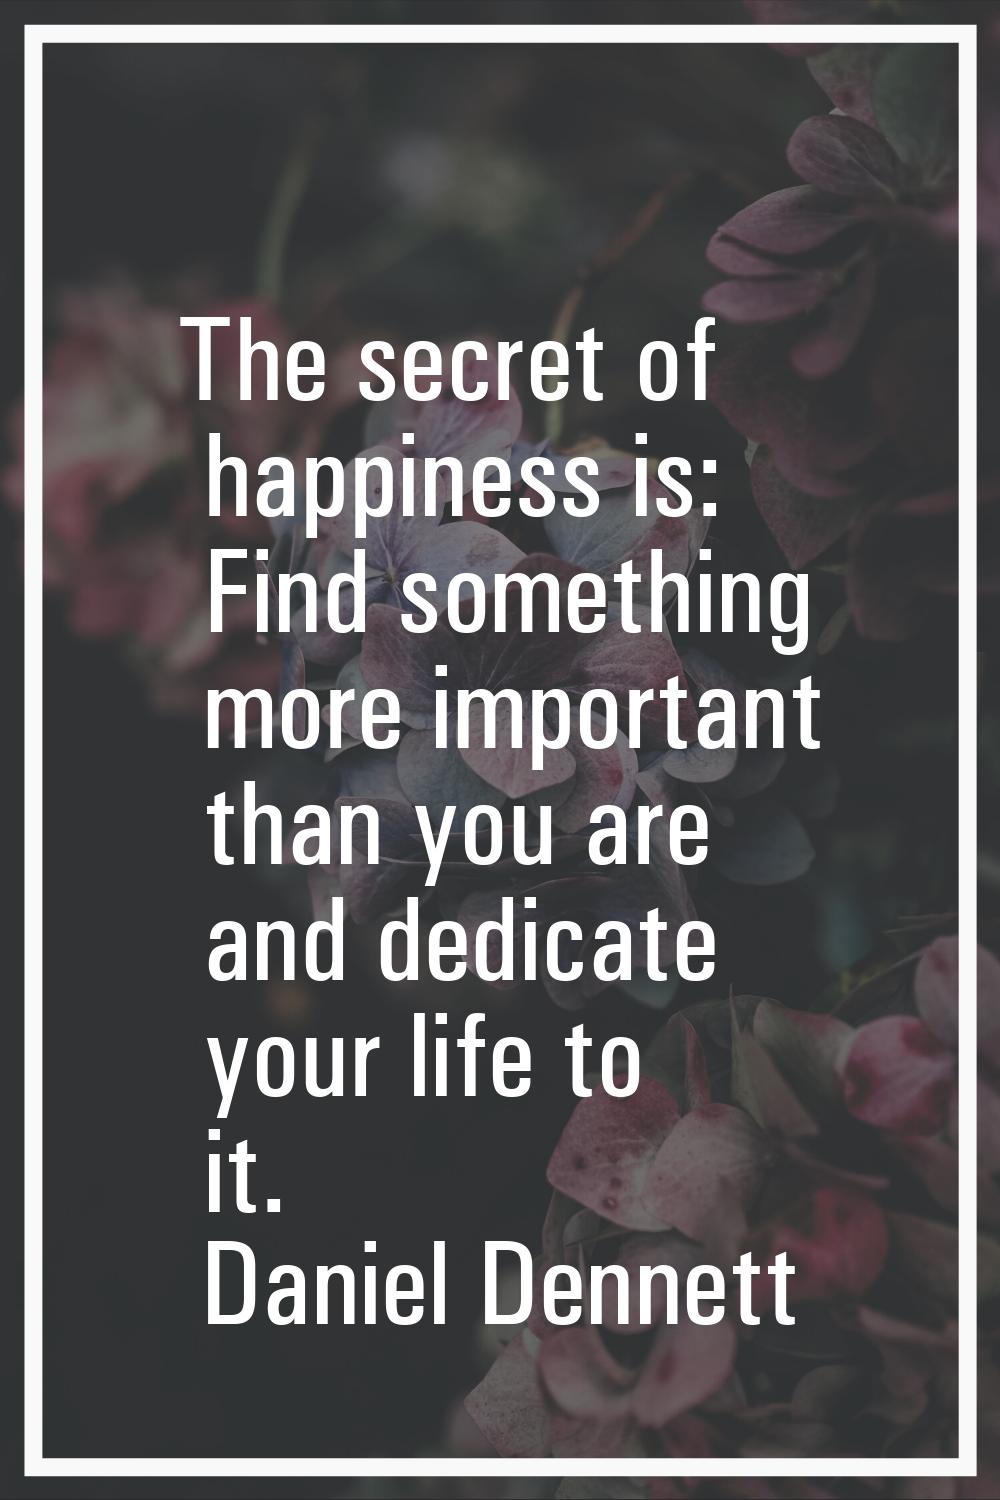 The secret of happiness is: Find something more important than you are and dedicate your life to it